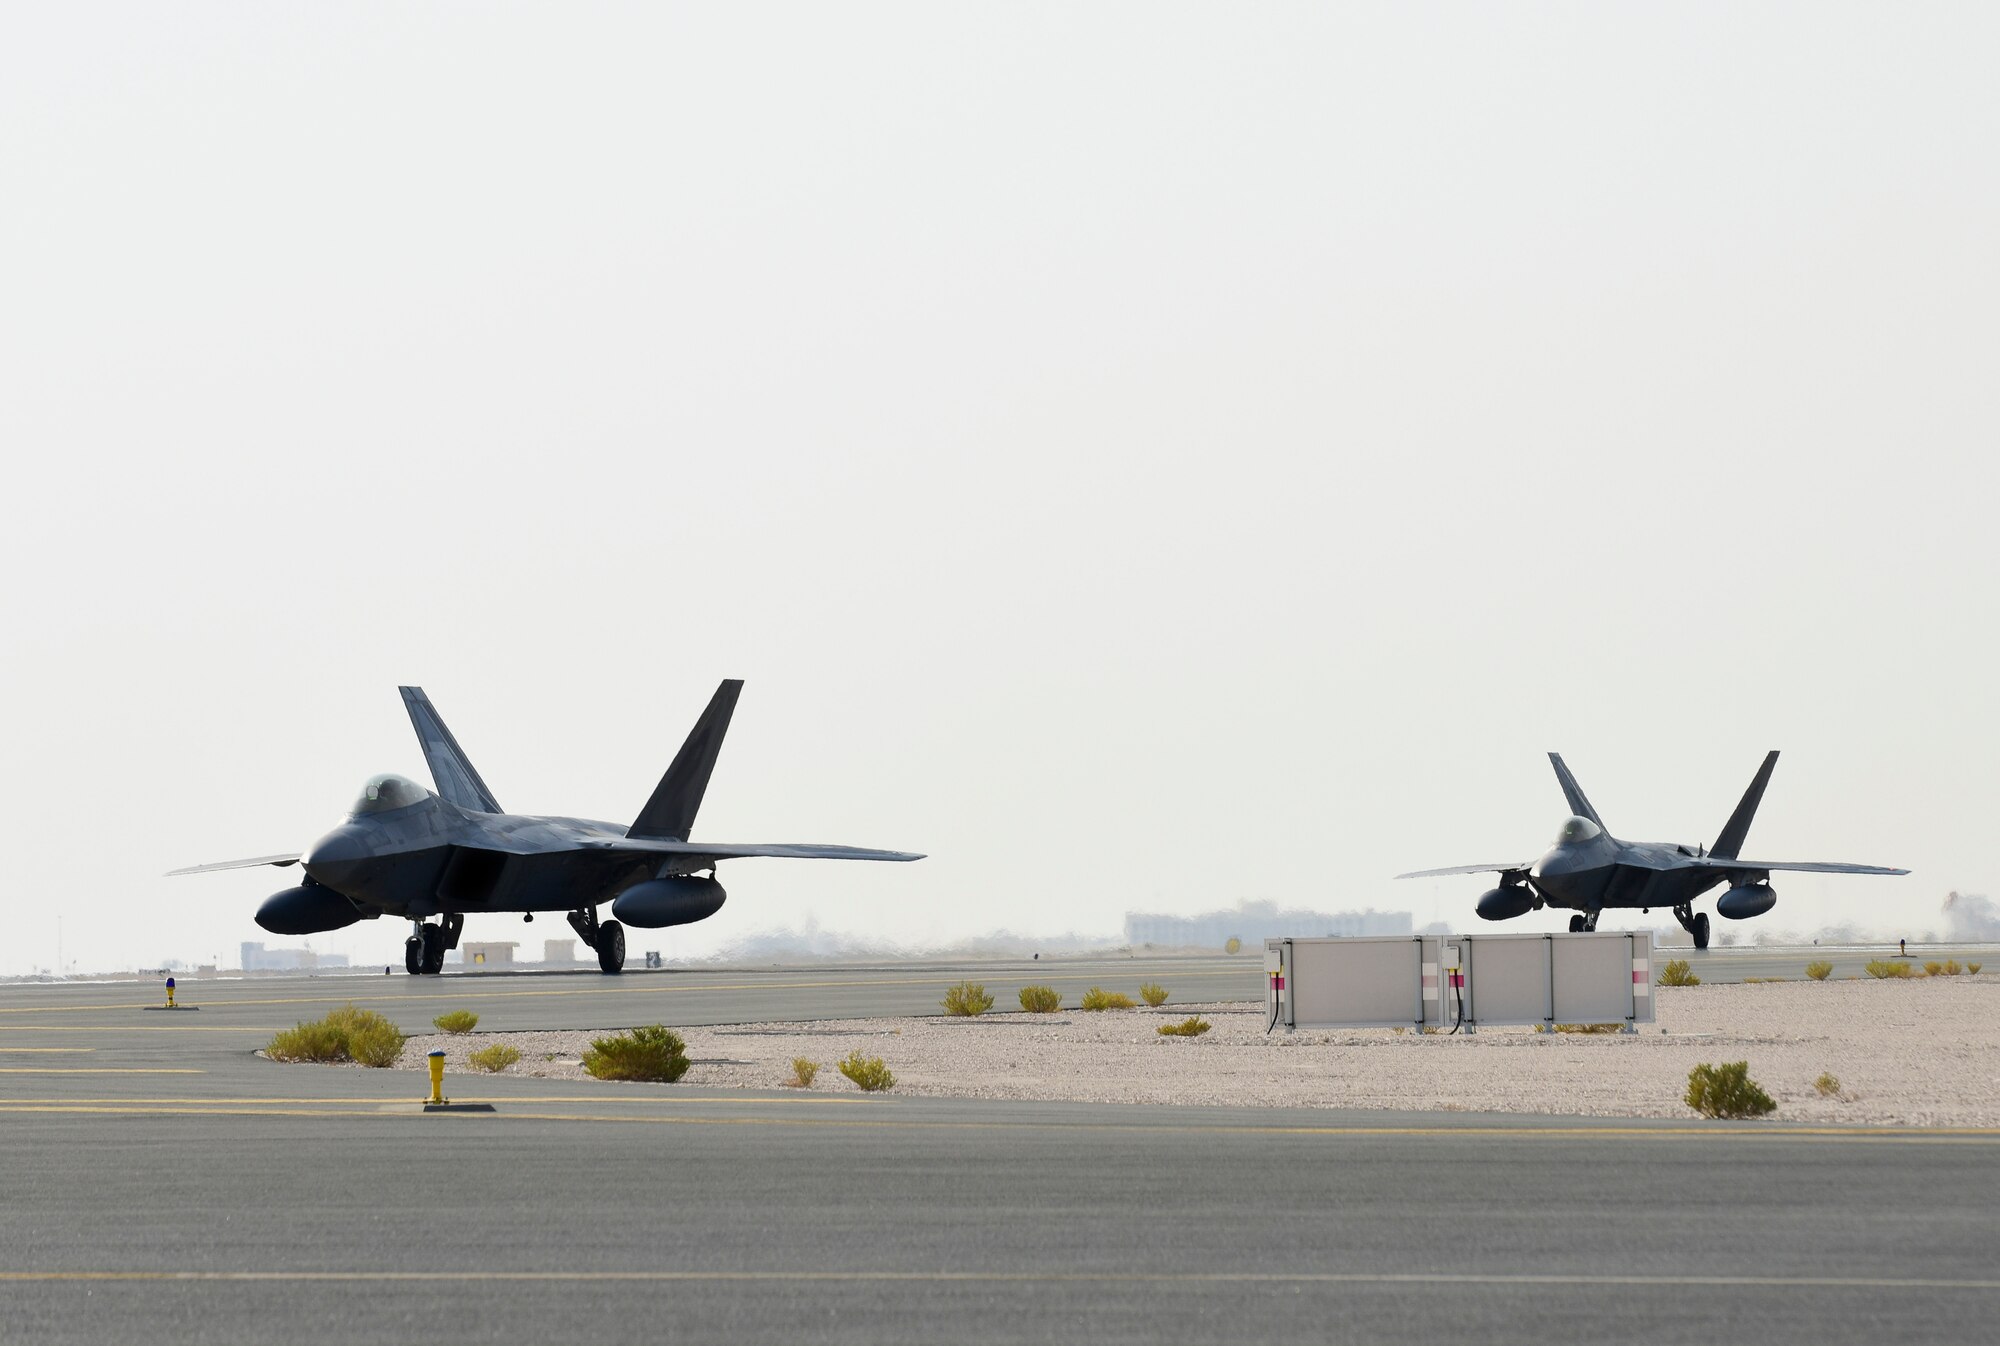 A photo of F-22s taxiing on a runway.